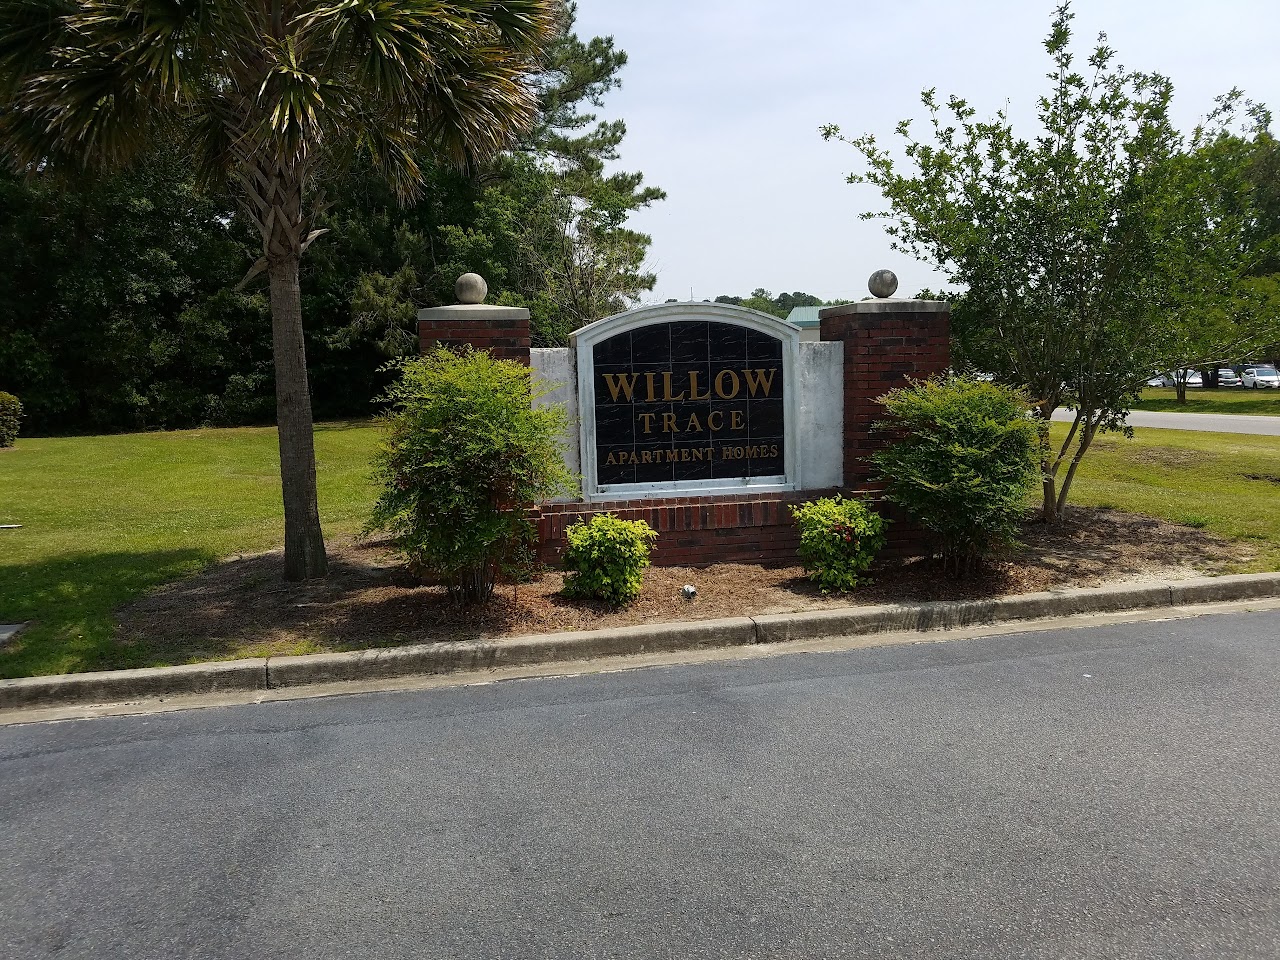 Photo of WILLOW TRACE. Affordable housing located at 8180 WINDSOR HILL BLVD NORTH CHARLESTON, SC 29420